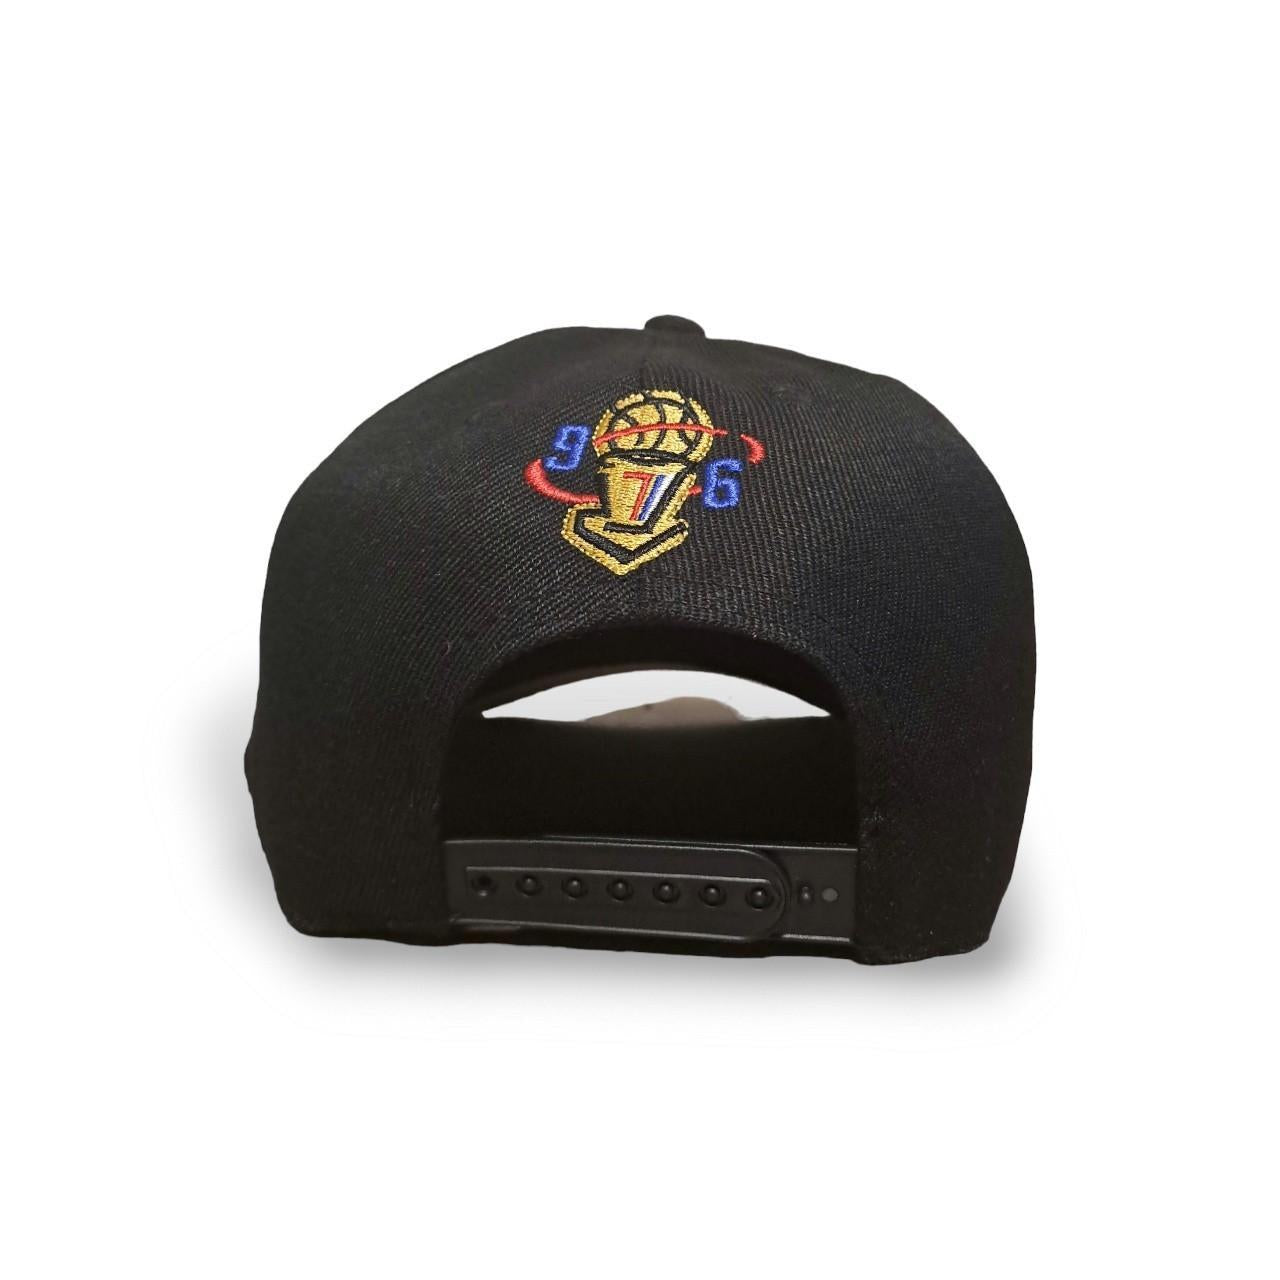 SOLD OUT | NBA Cap